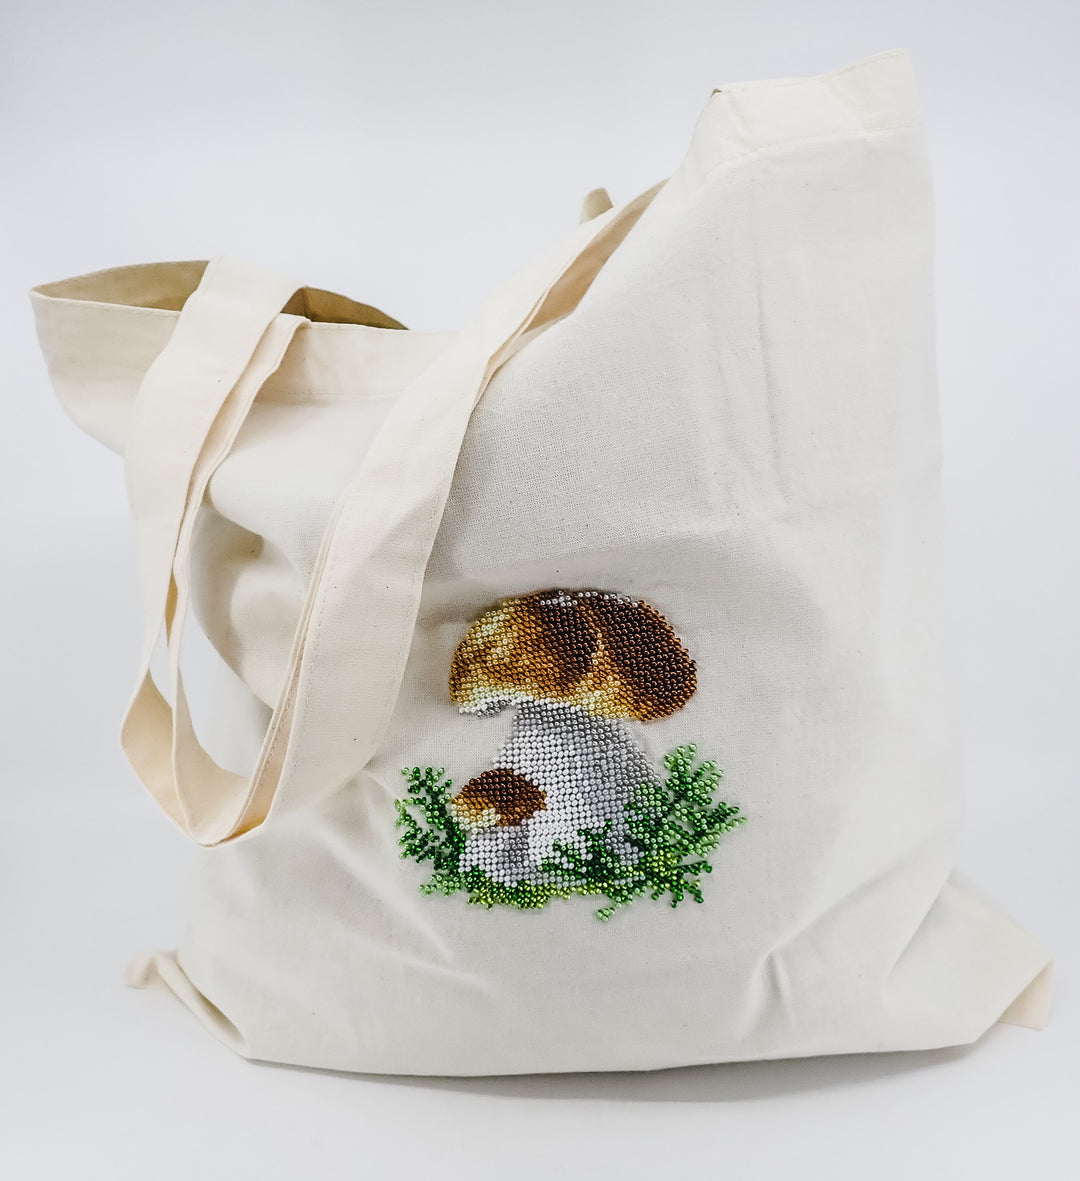 BEAD EMBROIDERY MUSHROOM FORAGING REUSABLE SHOPPING TOTE BAG MADE IN UKRAINE